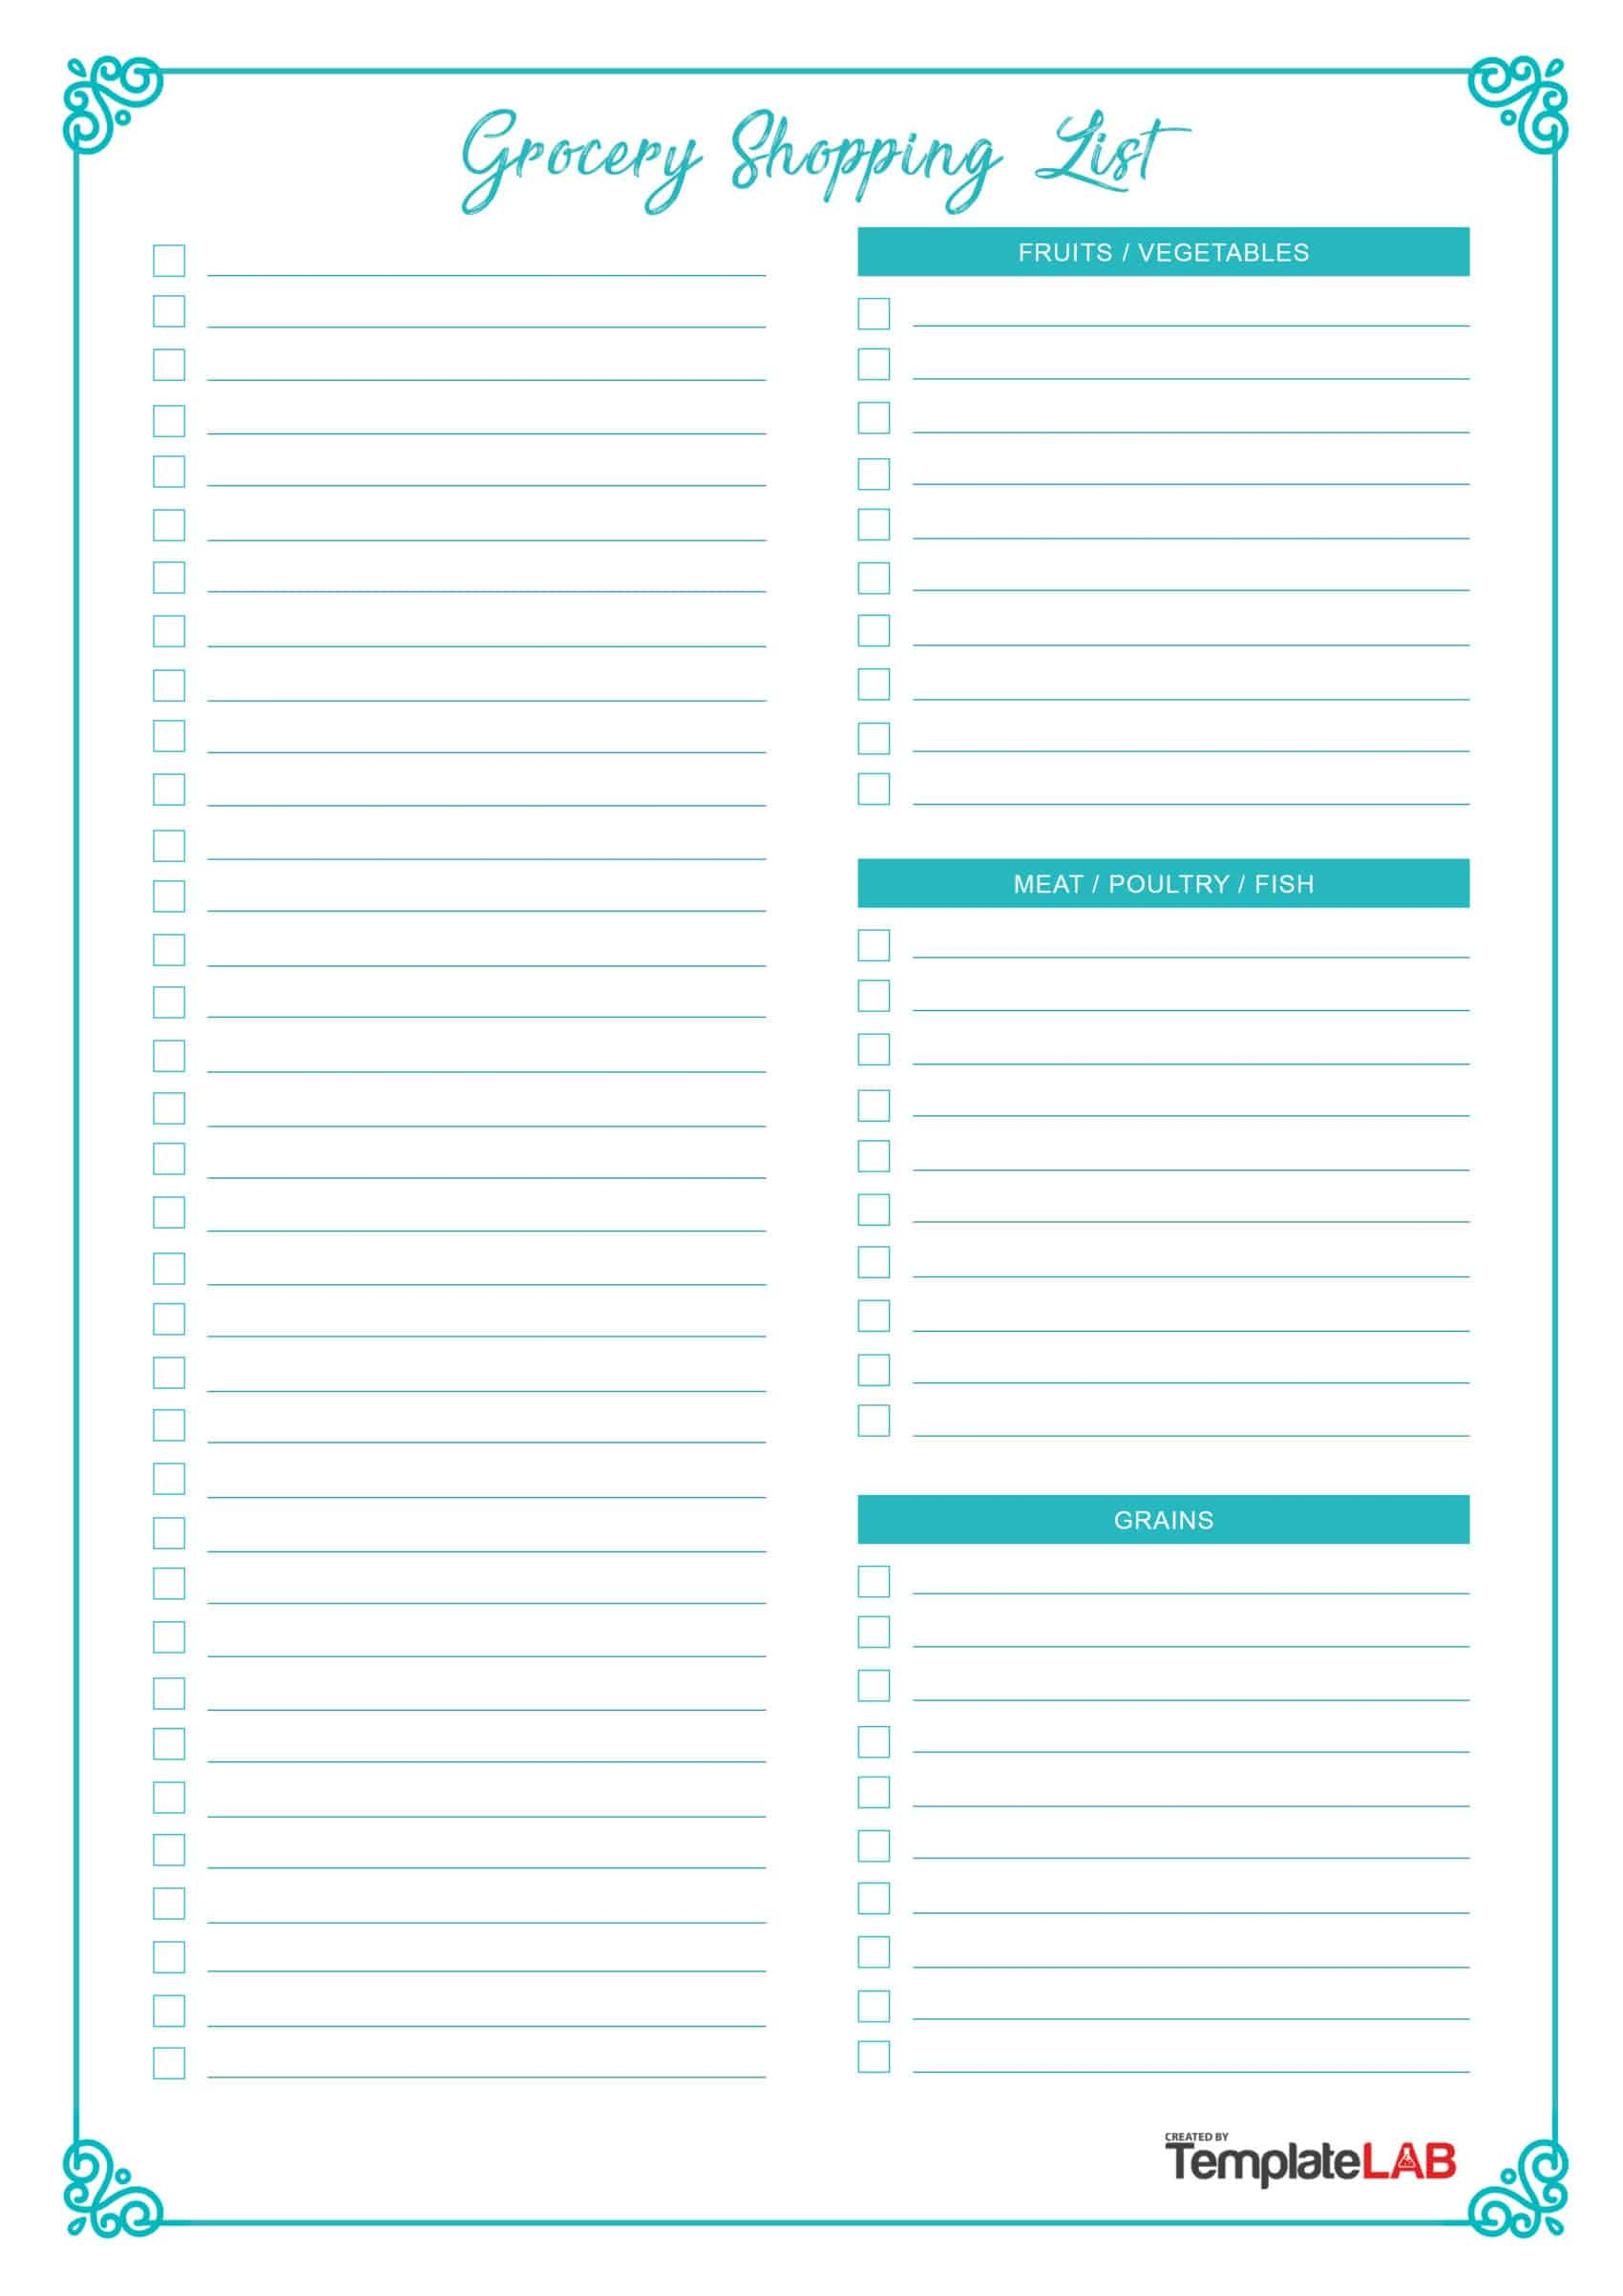 Shopping List Template Pdf Google Docs Grocery Editable in Editable Grocery List